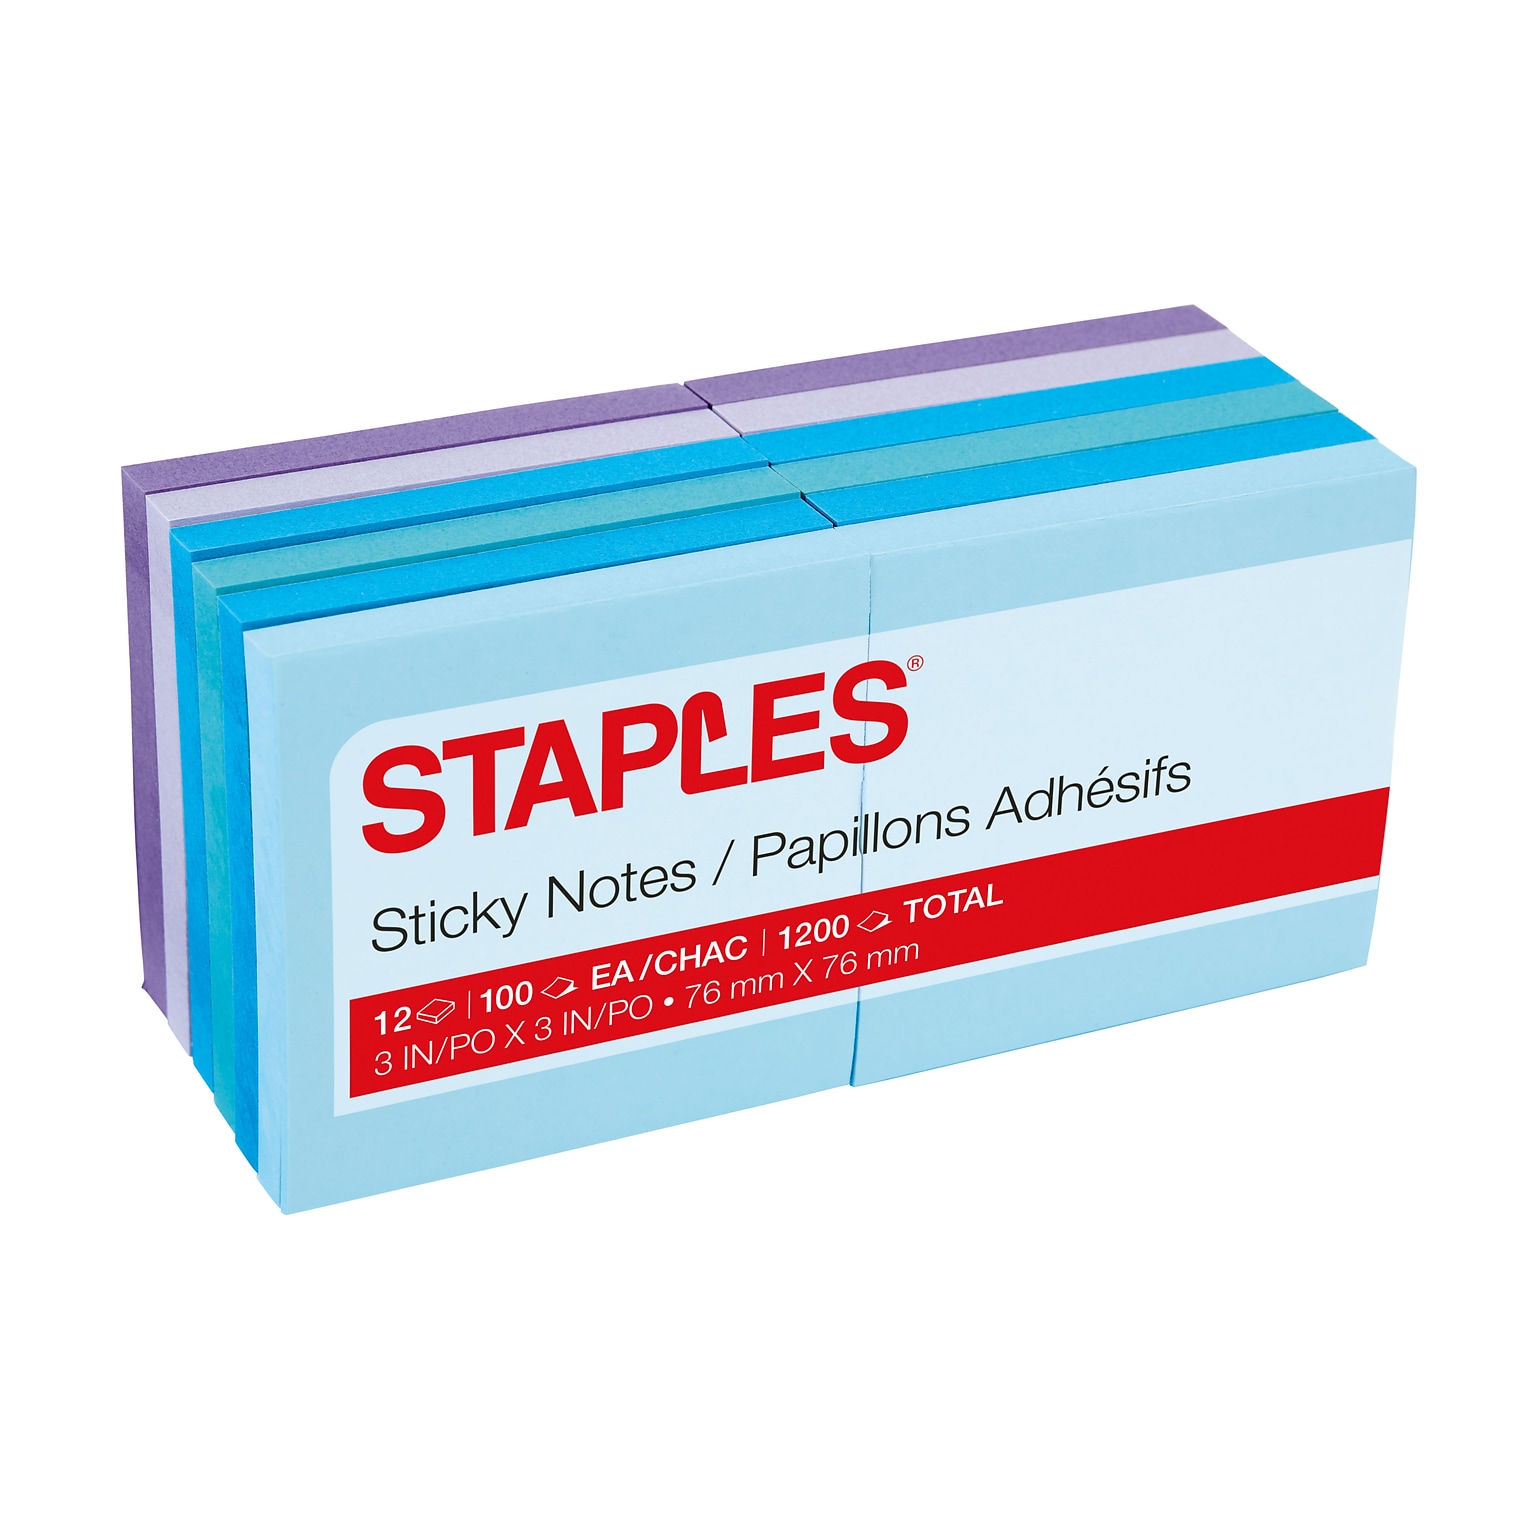 Staples® Stickies Notes, 3 x 3, Assorted Colors, 100 Sheet/Pad, 12 Pads/Pack 18 Packs (19758-US)